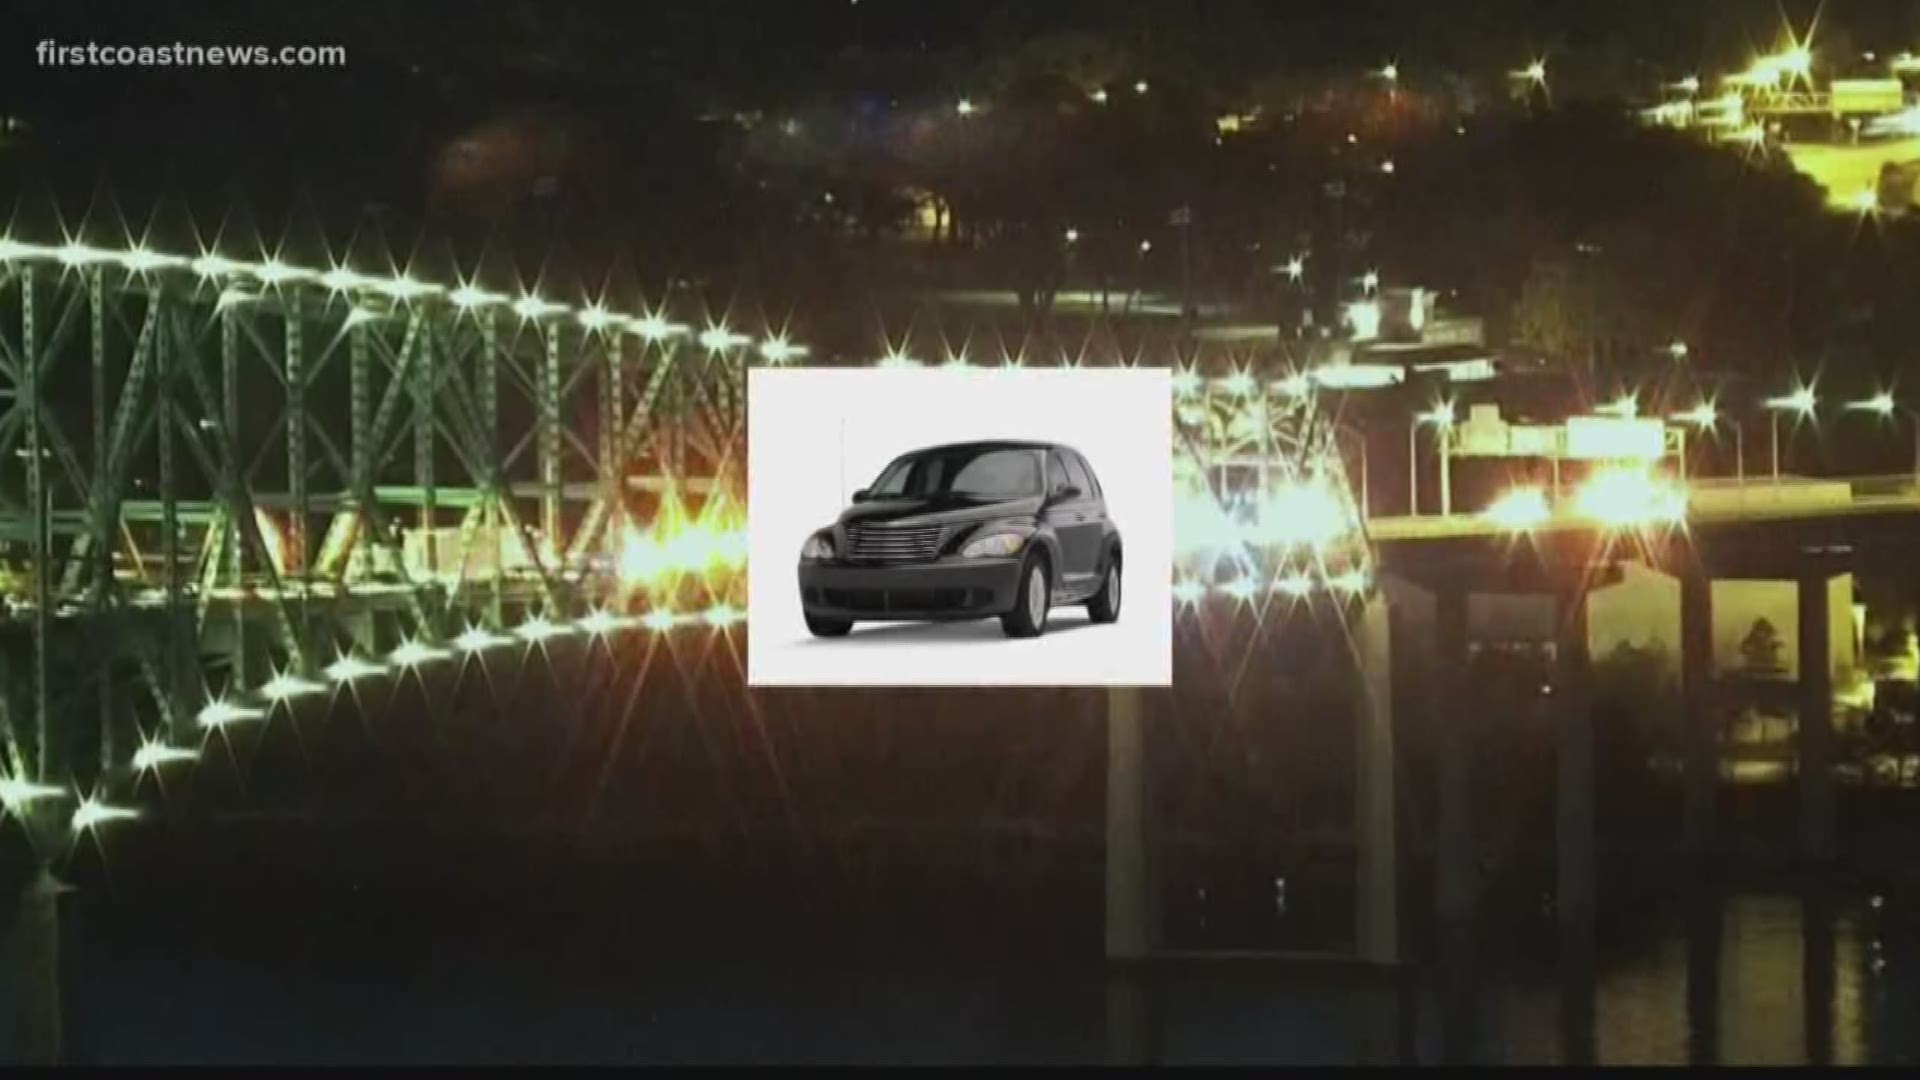 A Jacksonville family needs your help finding the car and the person who nearly sent them off the side of the Hart Bridge Sunday night. The hit-and-run crash happened just after 7:30 p.m.